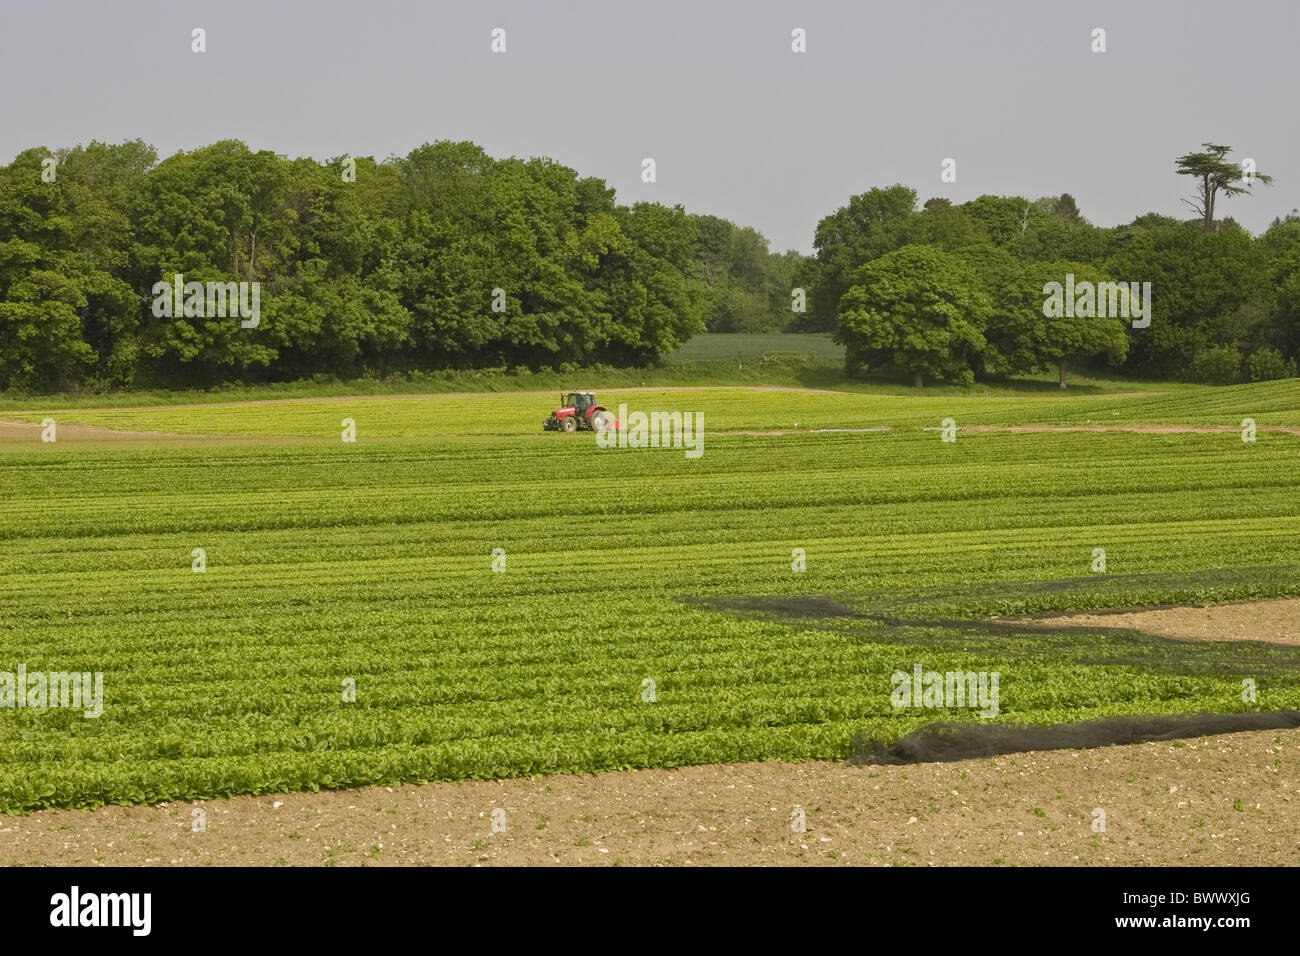 Agriculture Agricultural Agricultures Amaranthaceae Tractor Tractors Topping Landcrop Landcrops Crop Cropping Crops Cultivate Stock Photo